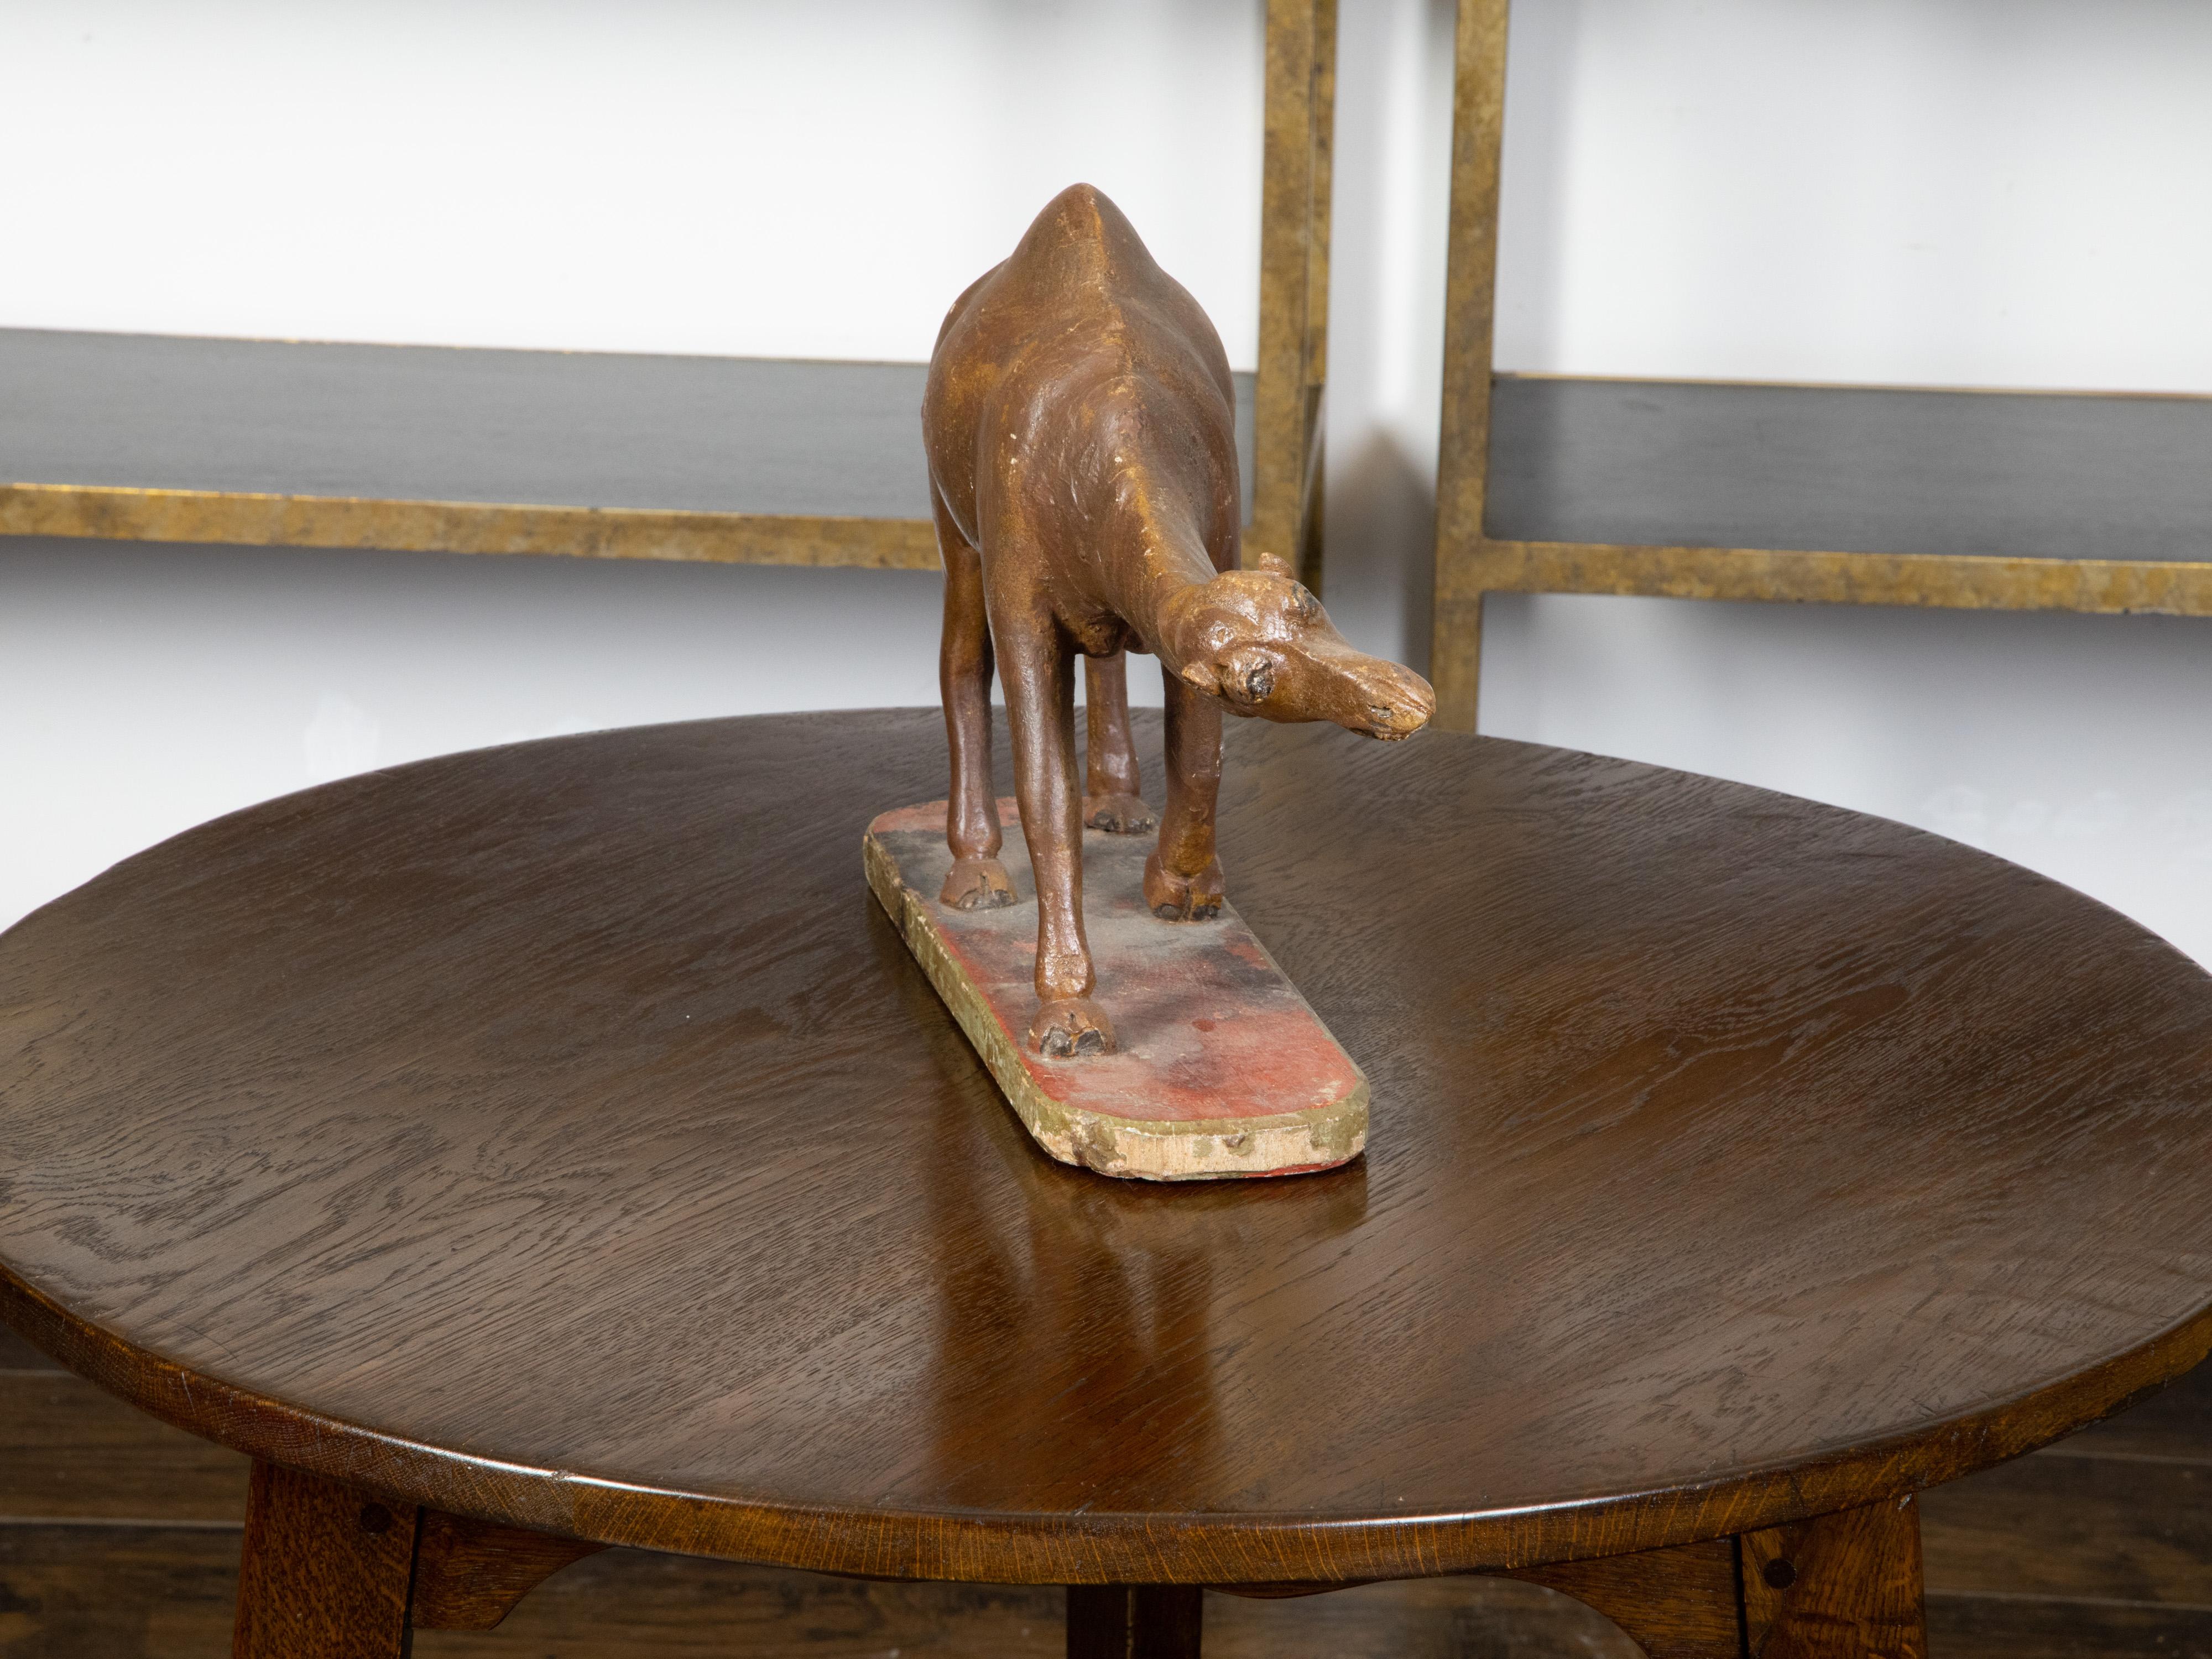 19th Century Italian Carved Wooden Dromedary Camel Sculpture on Oval Base For Sale 1